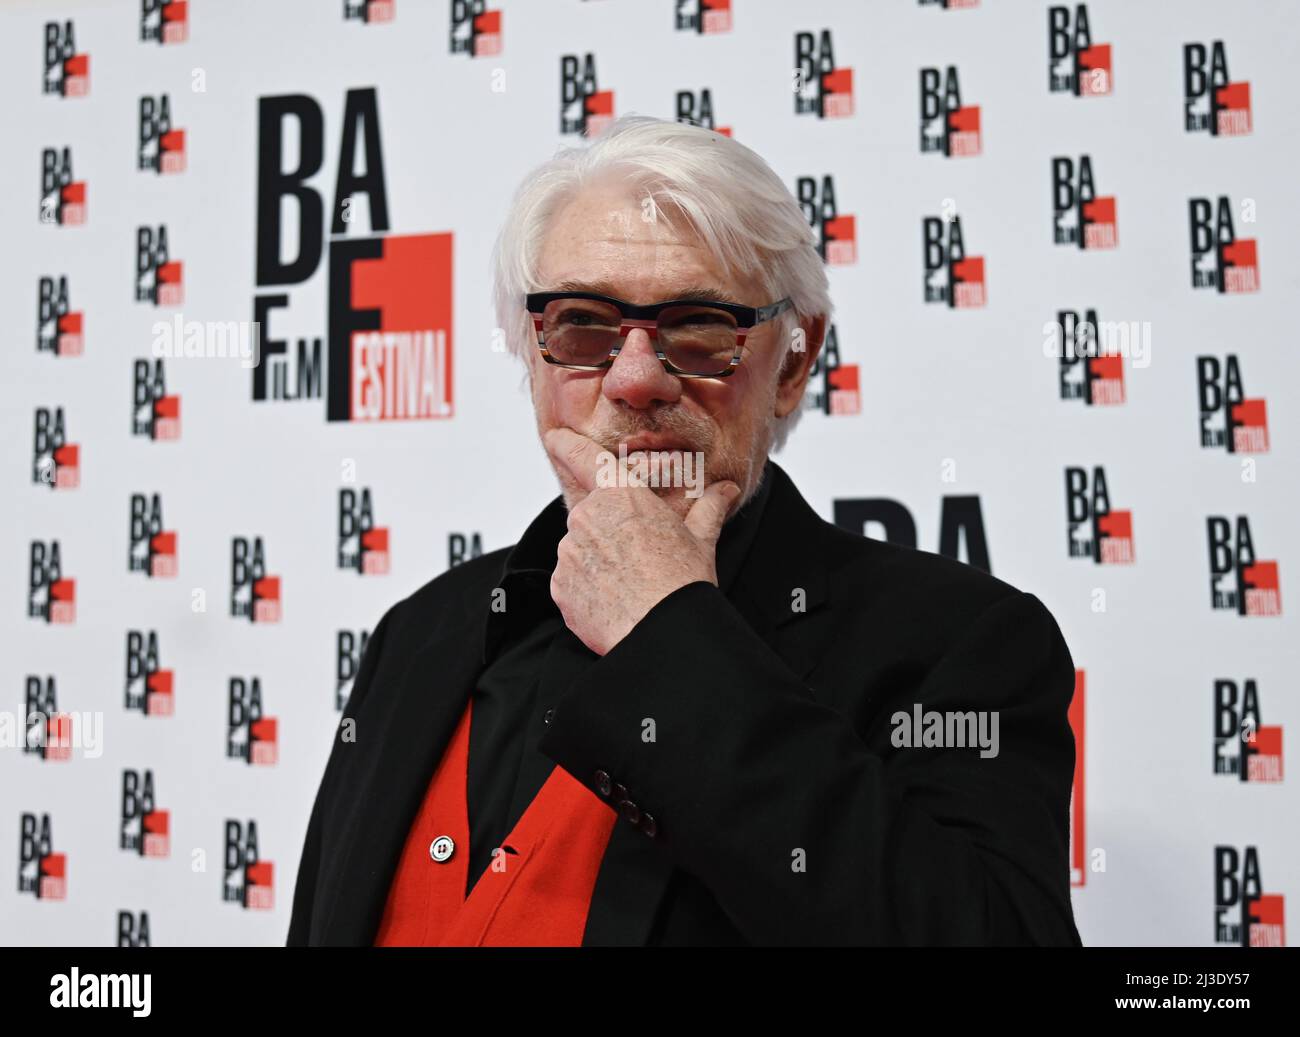 Busto Arsizio, Italy. 07th Apr, 2022. Busto Arsizio, Italy BA Film Festival  2022 Photocall Ricky Tognazzi for the presentation of his documentary The  mad desire to live, a lively, passionate, original portrait